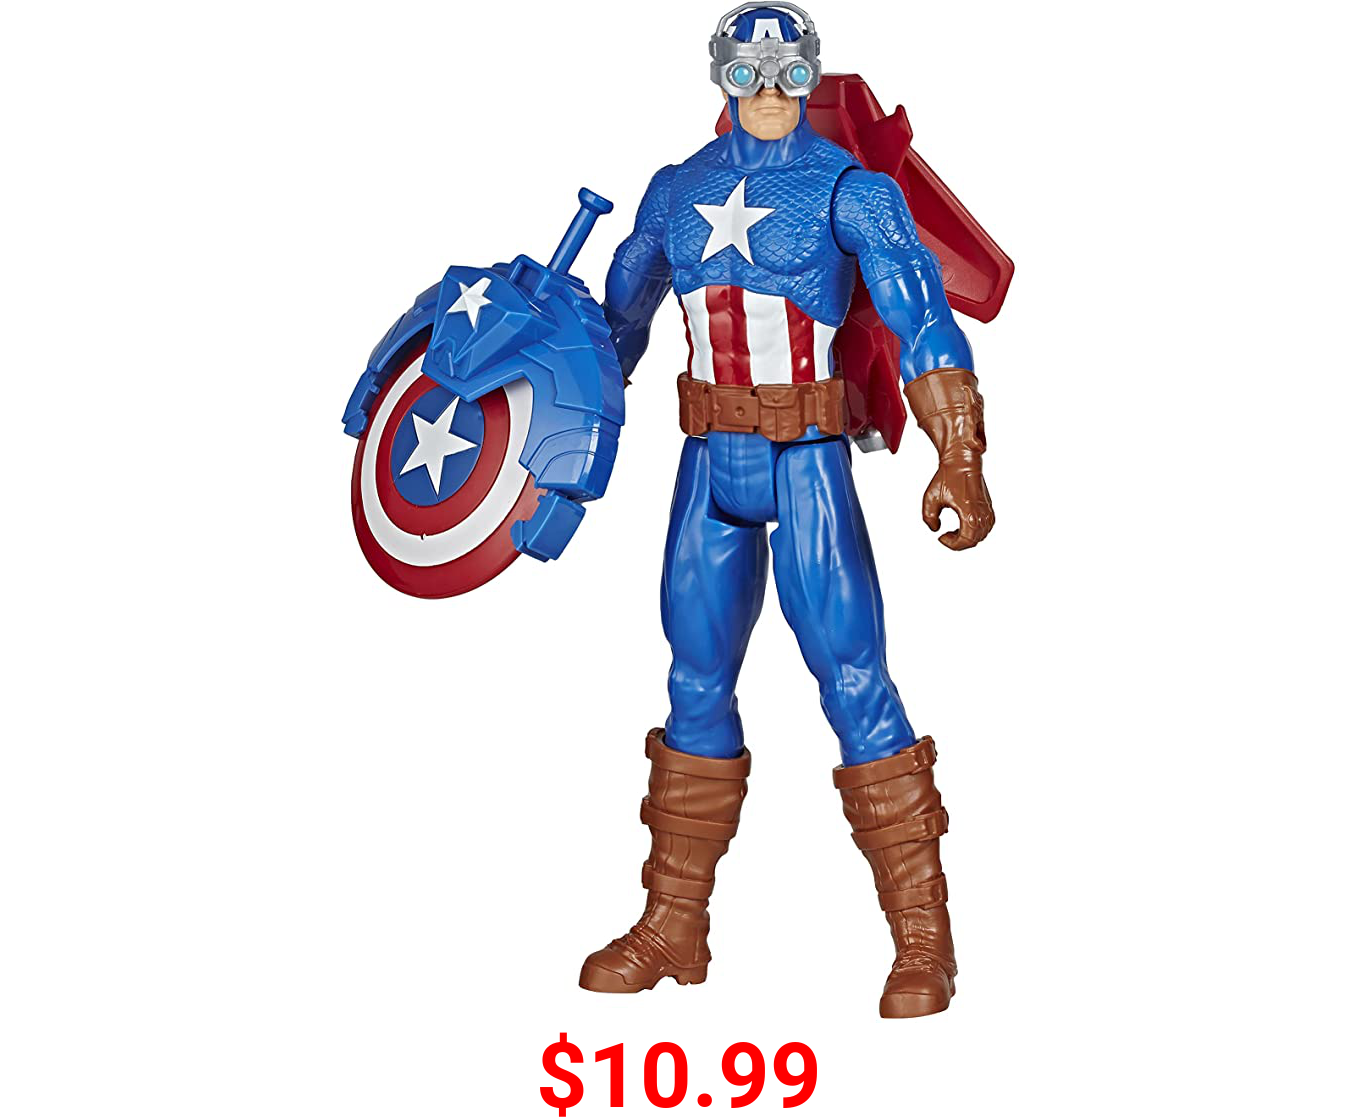 Avengers Marvel Titan Hero Series Blast Gear Captain America, 12-Inch Toy, with Launcher, 2 Accessories and Projectile, Ages 4 and Up